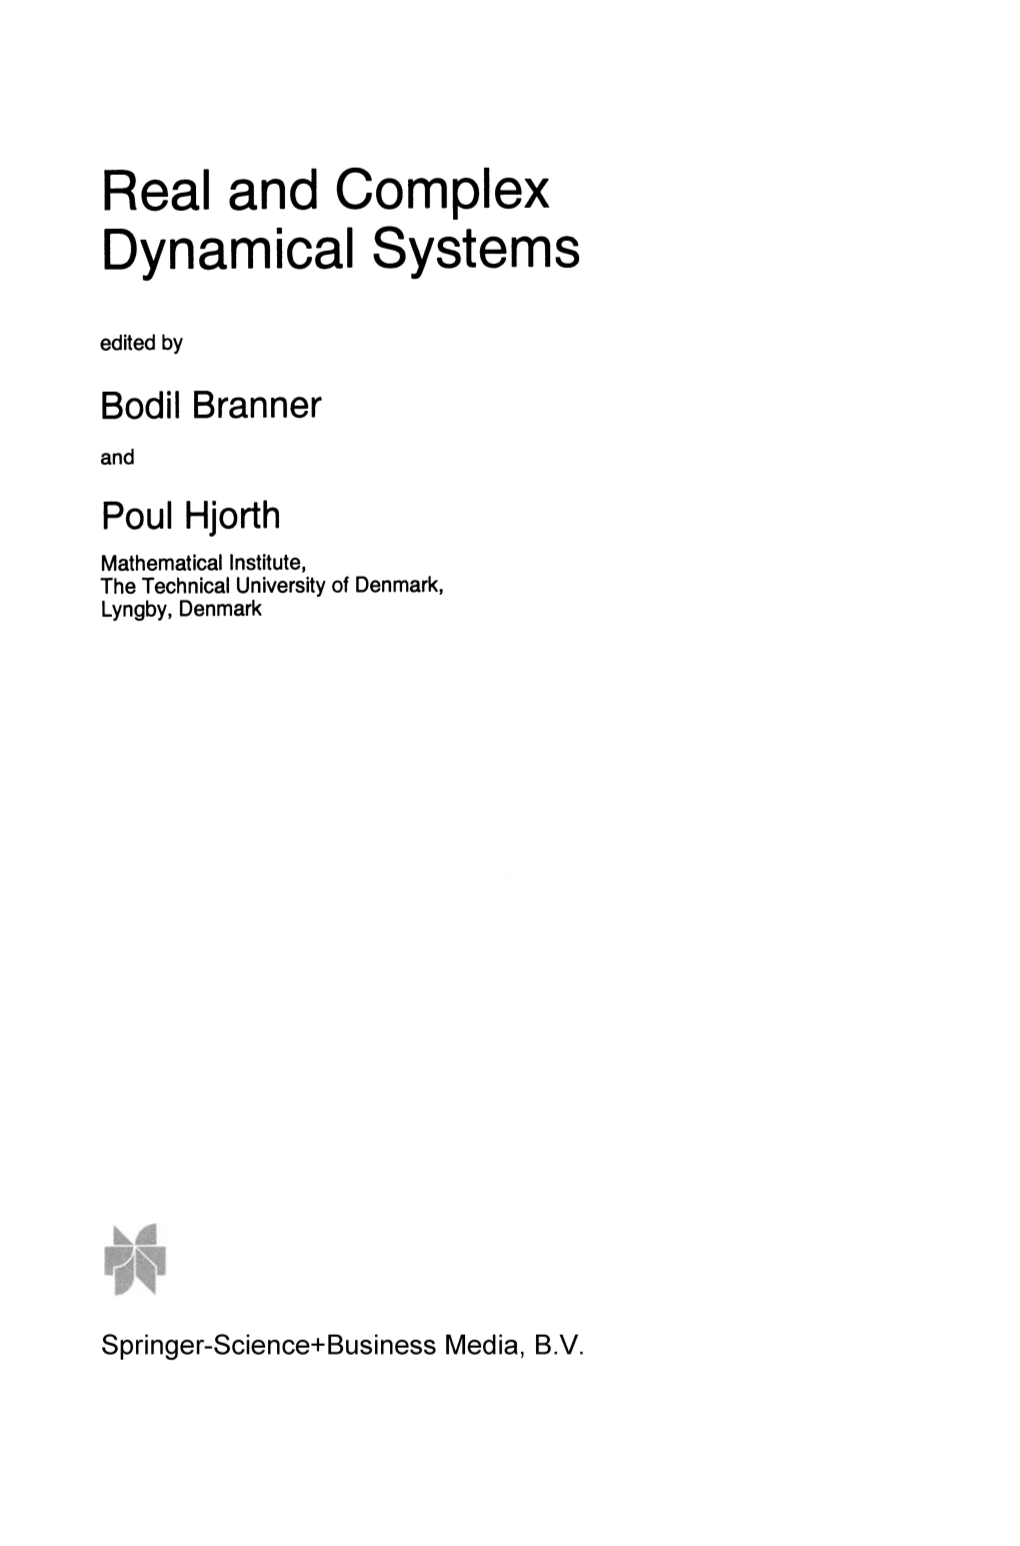 Real and Complex Dynamical Systems Edited by Bodil Branner and Poul Hjorth Mathematical Institute, the Technical University of Denmark, Lyngby, Denmark